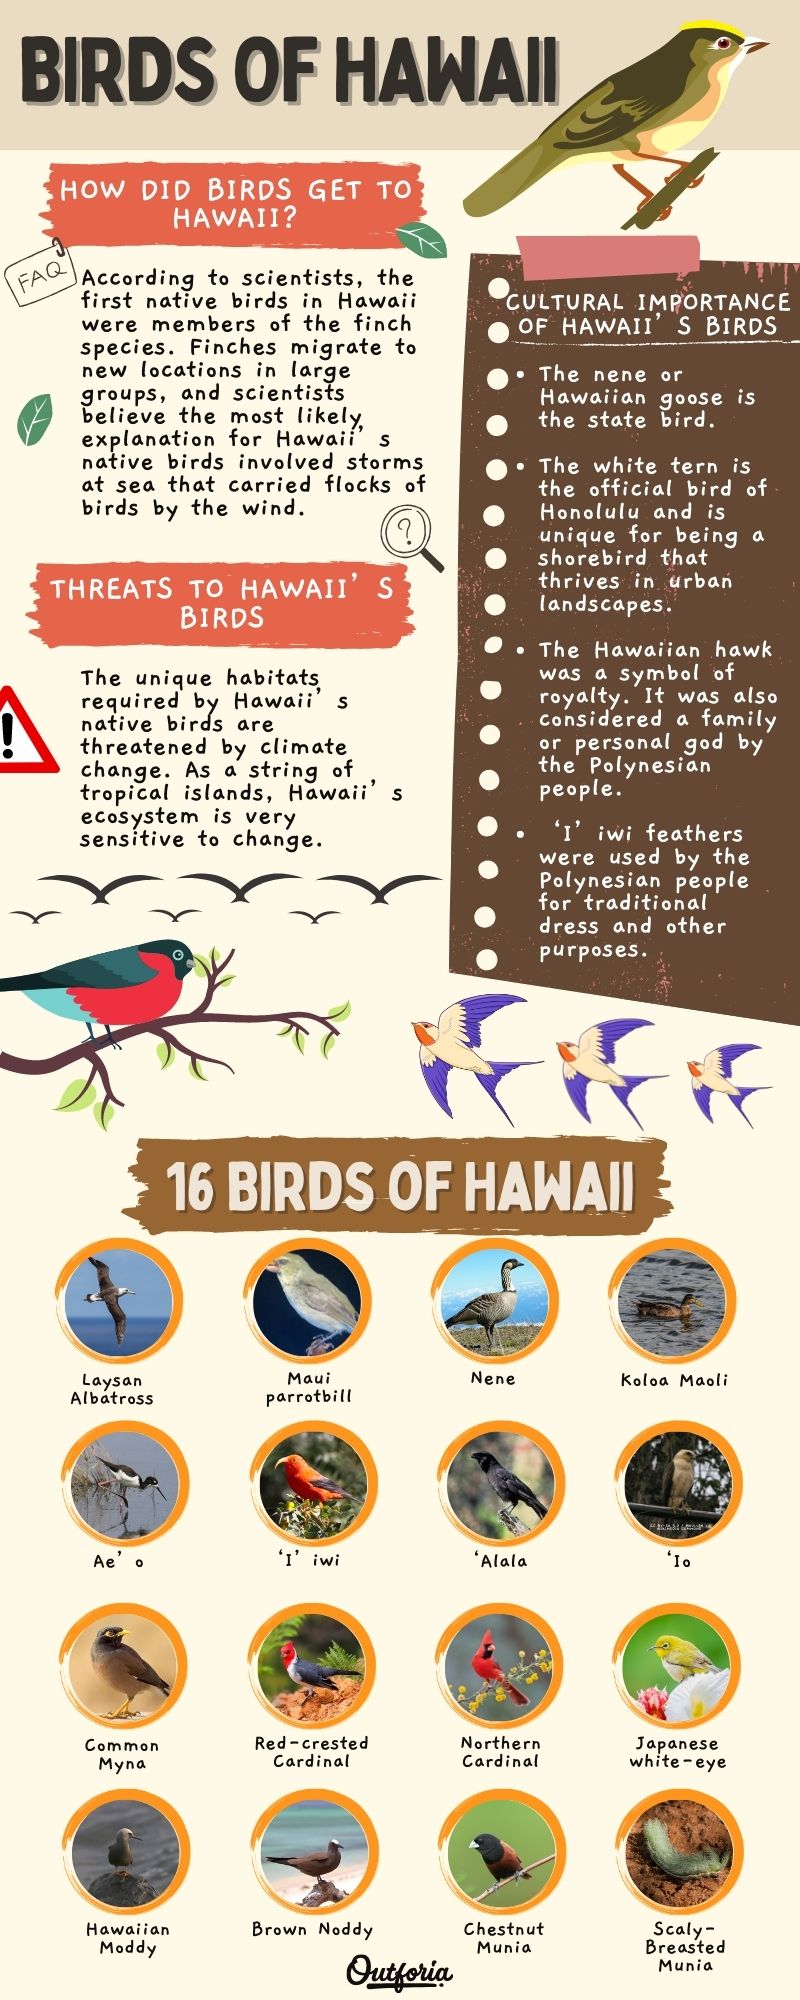 Chart of the Birds of Hawaii complete with Facts, Photos, Threats and more